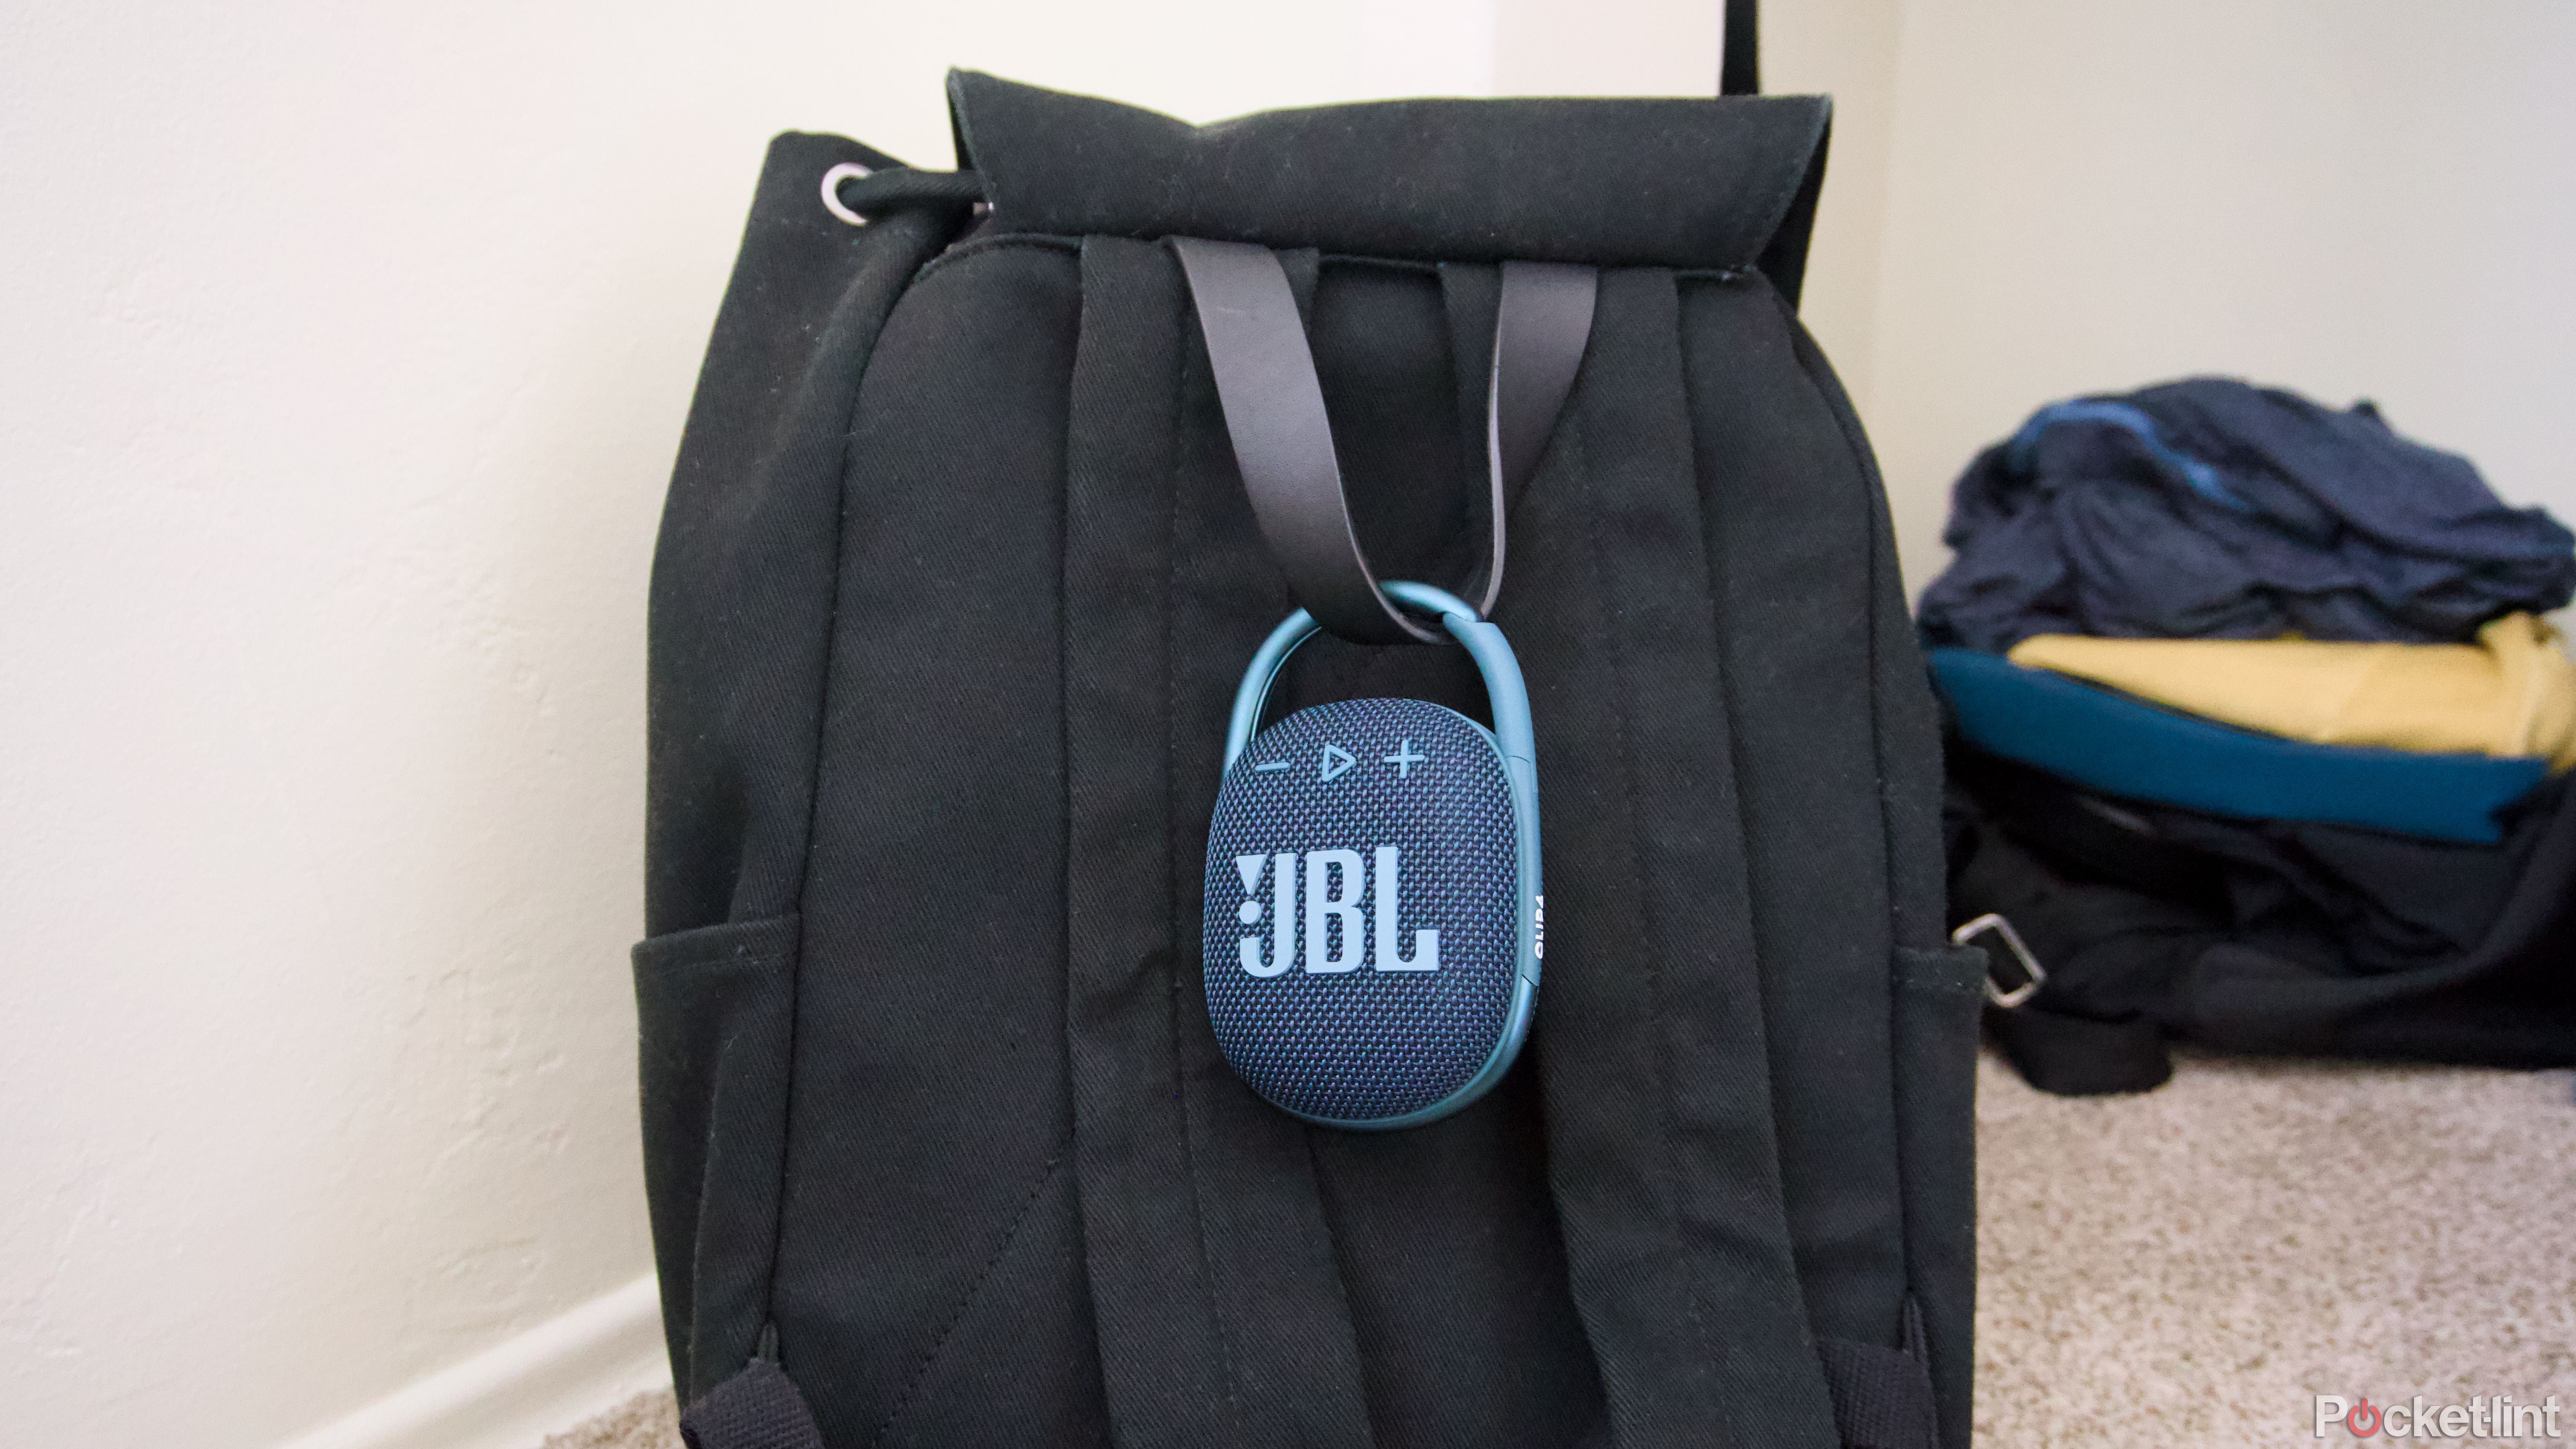 A JBL Clip 4 speaker attached to a black backpack.